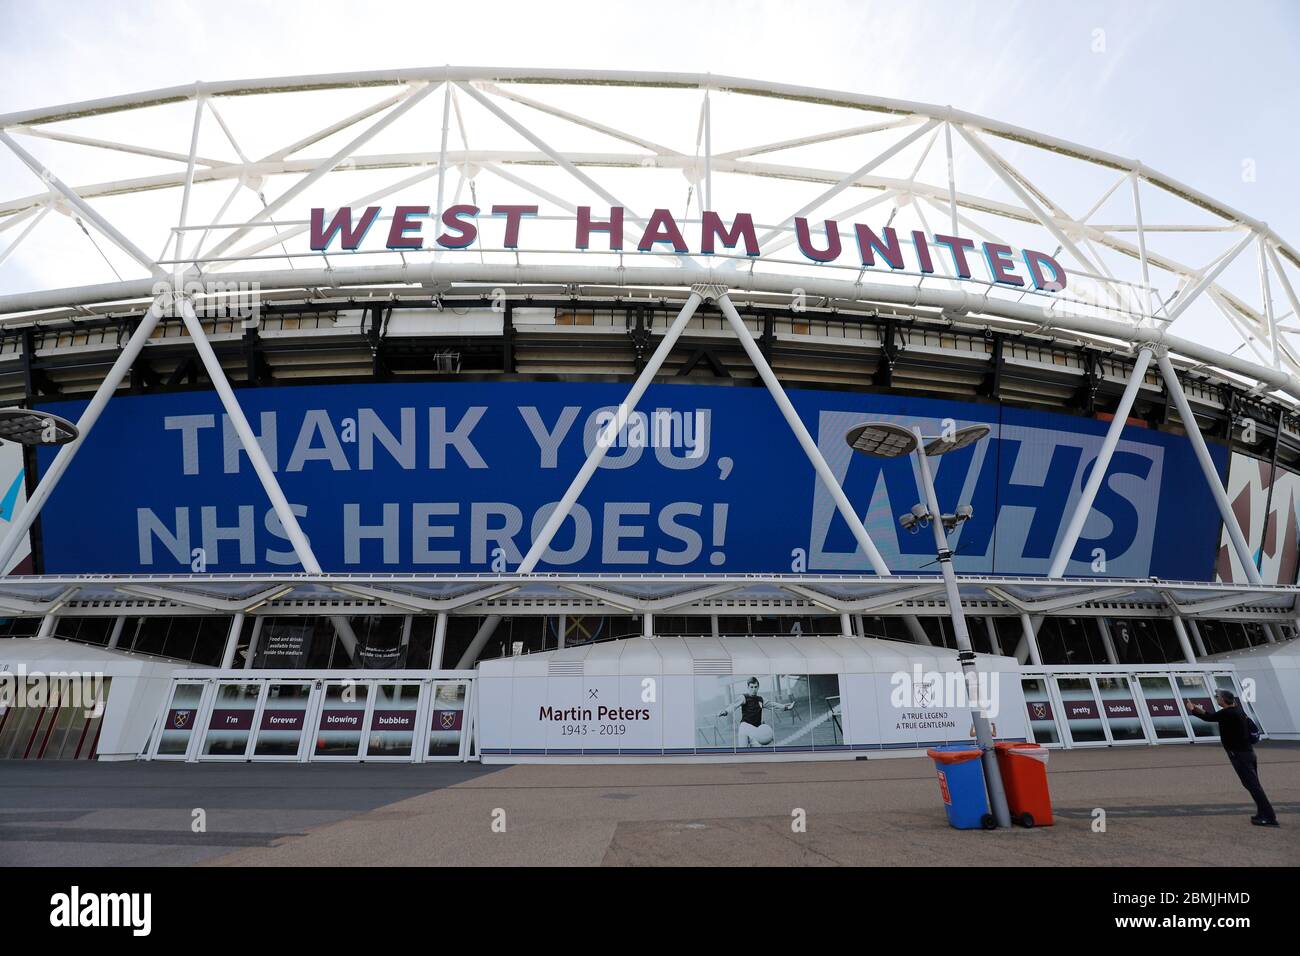 London Stadium, London, UK. 9th May, 2020. The London Stadium, home of West Ham United, deserted during the lockdown for the Covid-19 virus; Giant screen displaying Thank you NHS Heros Credit: Action Plus Sports/Alamy Live News Stock Photo